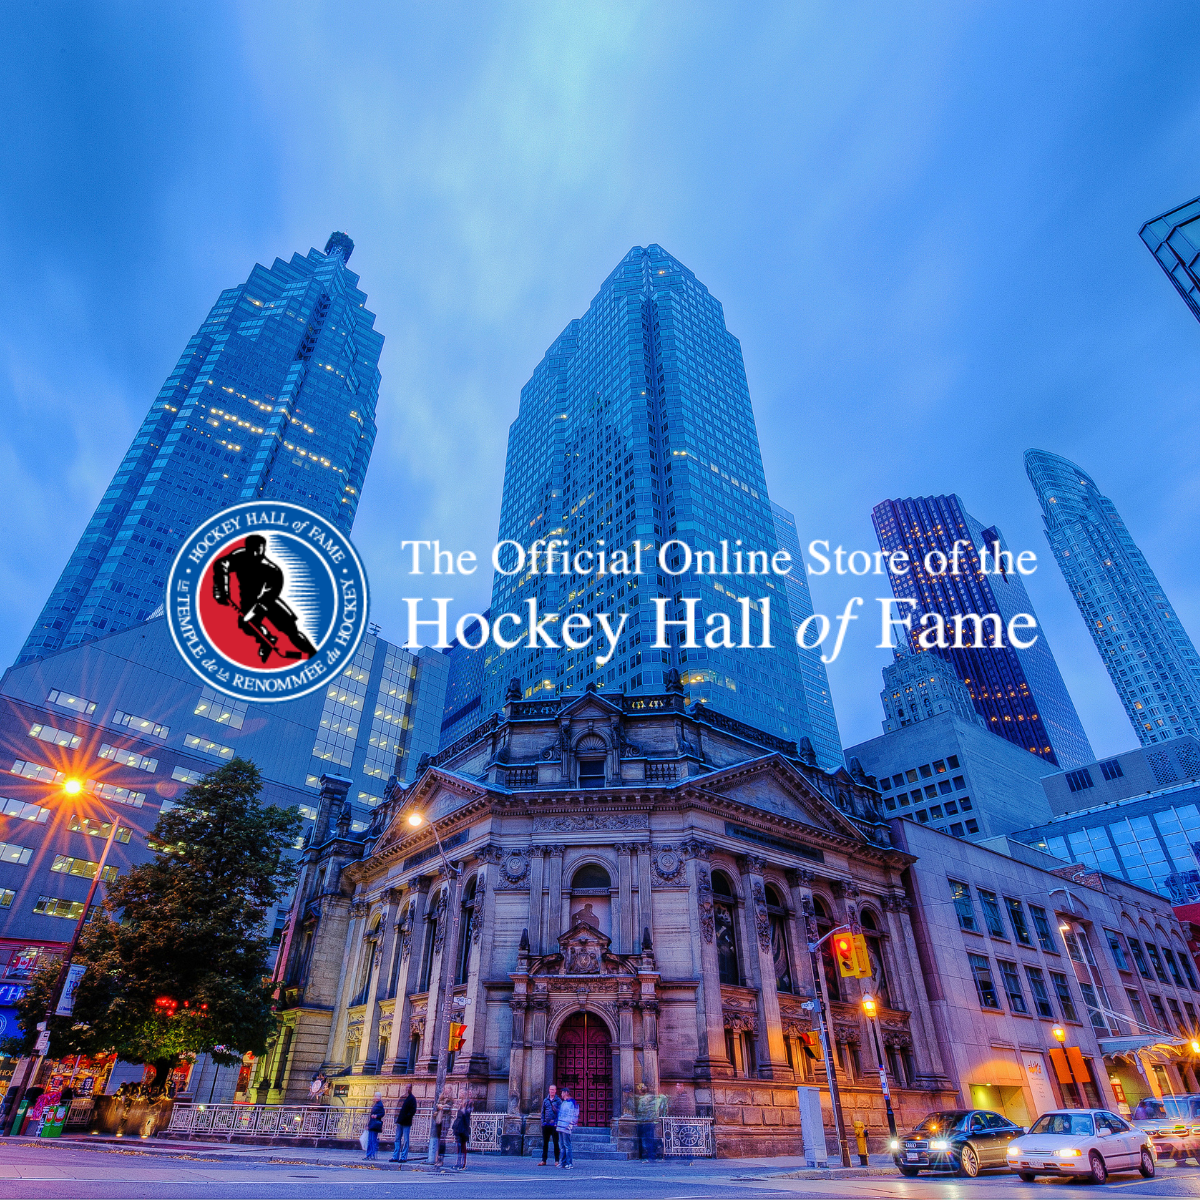 Toronto – July 2019 – Hall of Fame Hockey Jerseys (or Sweaters if